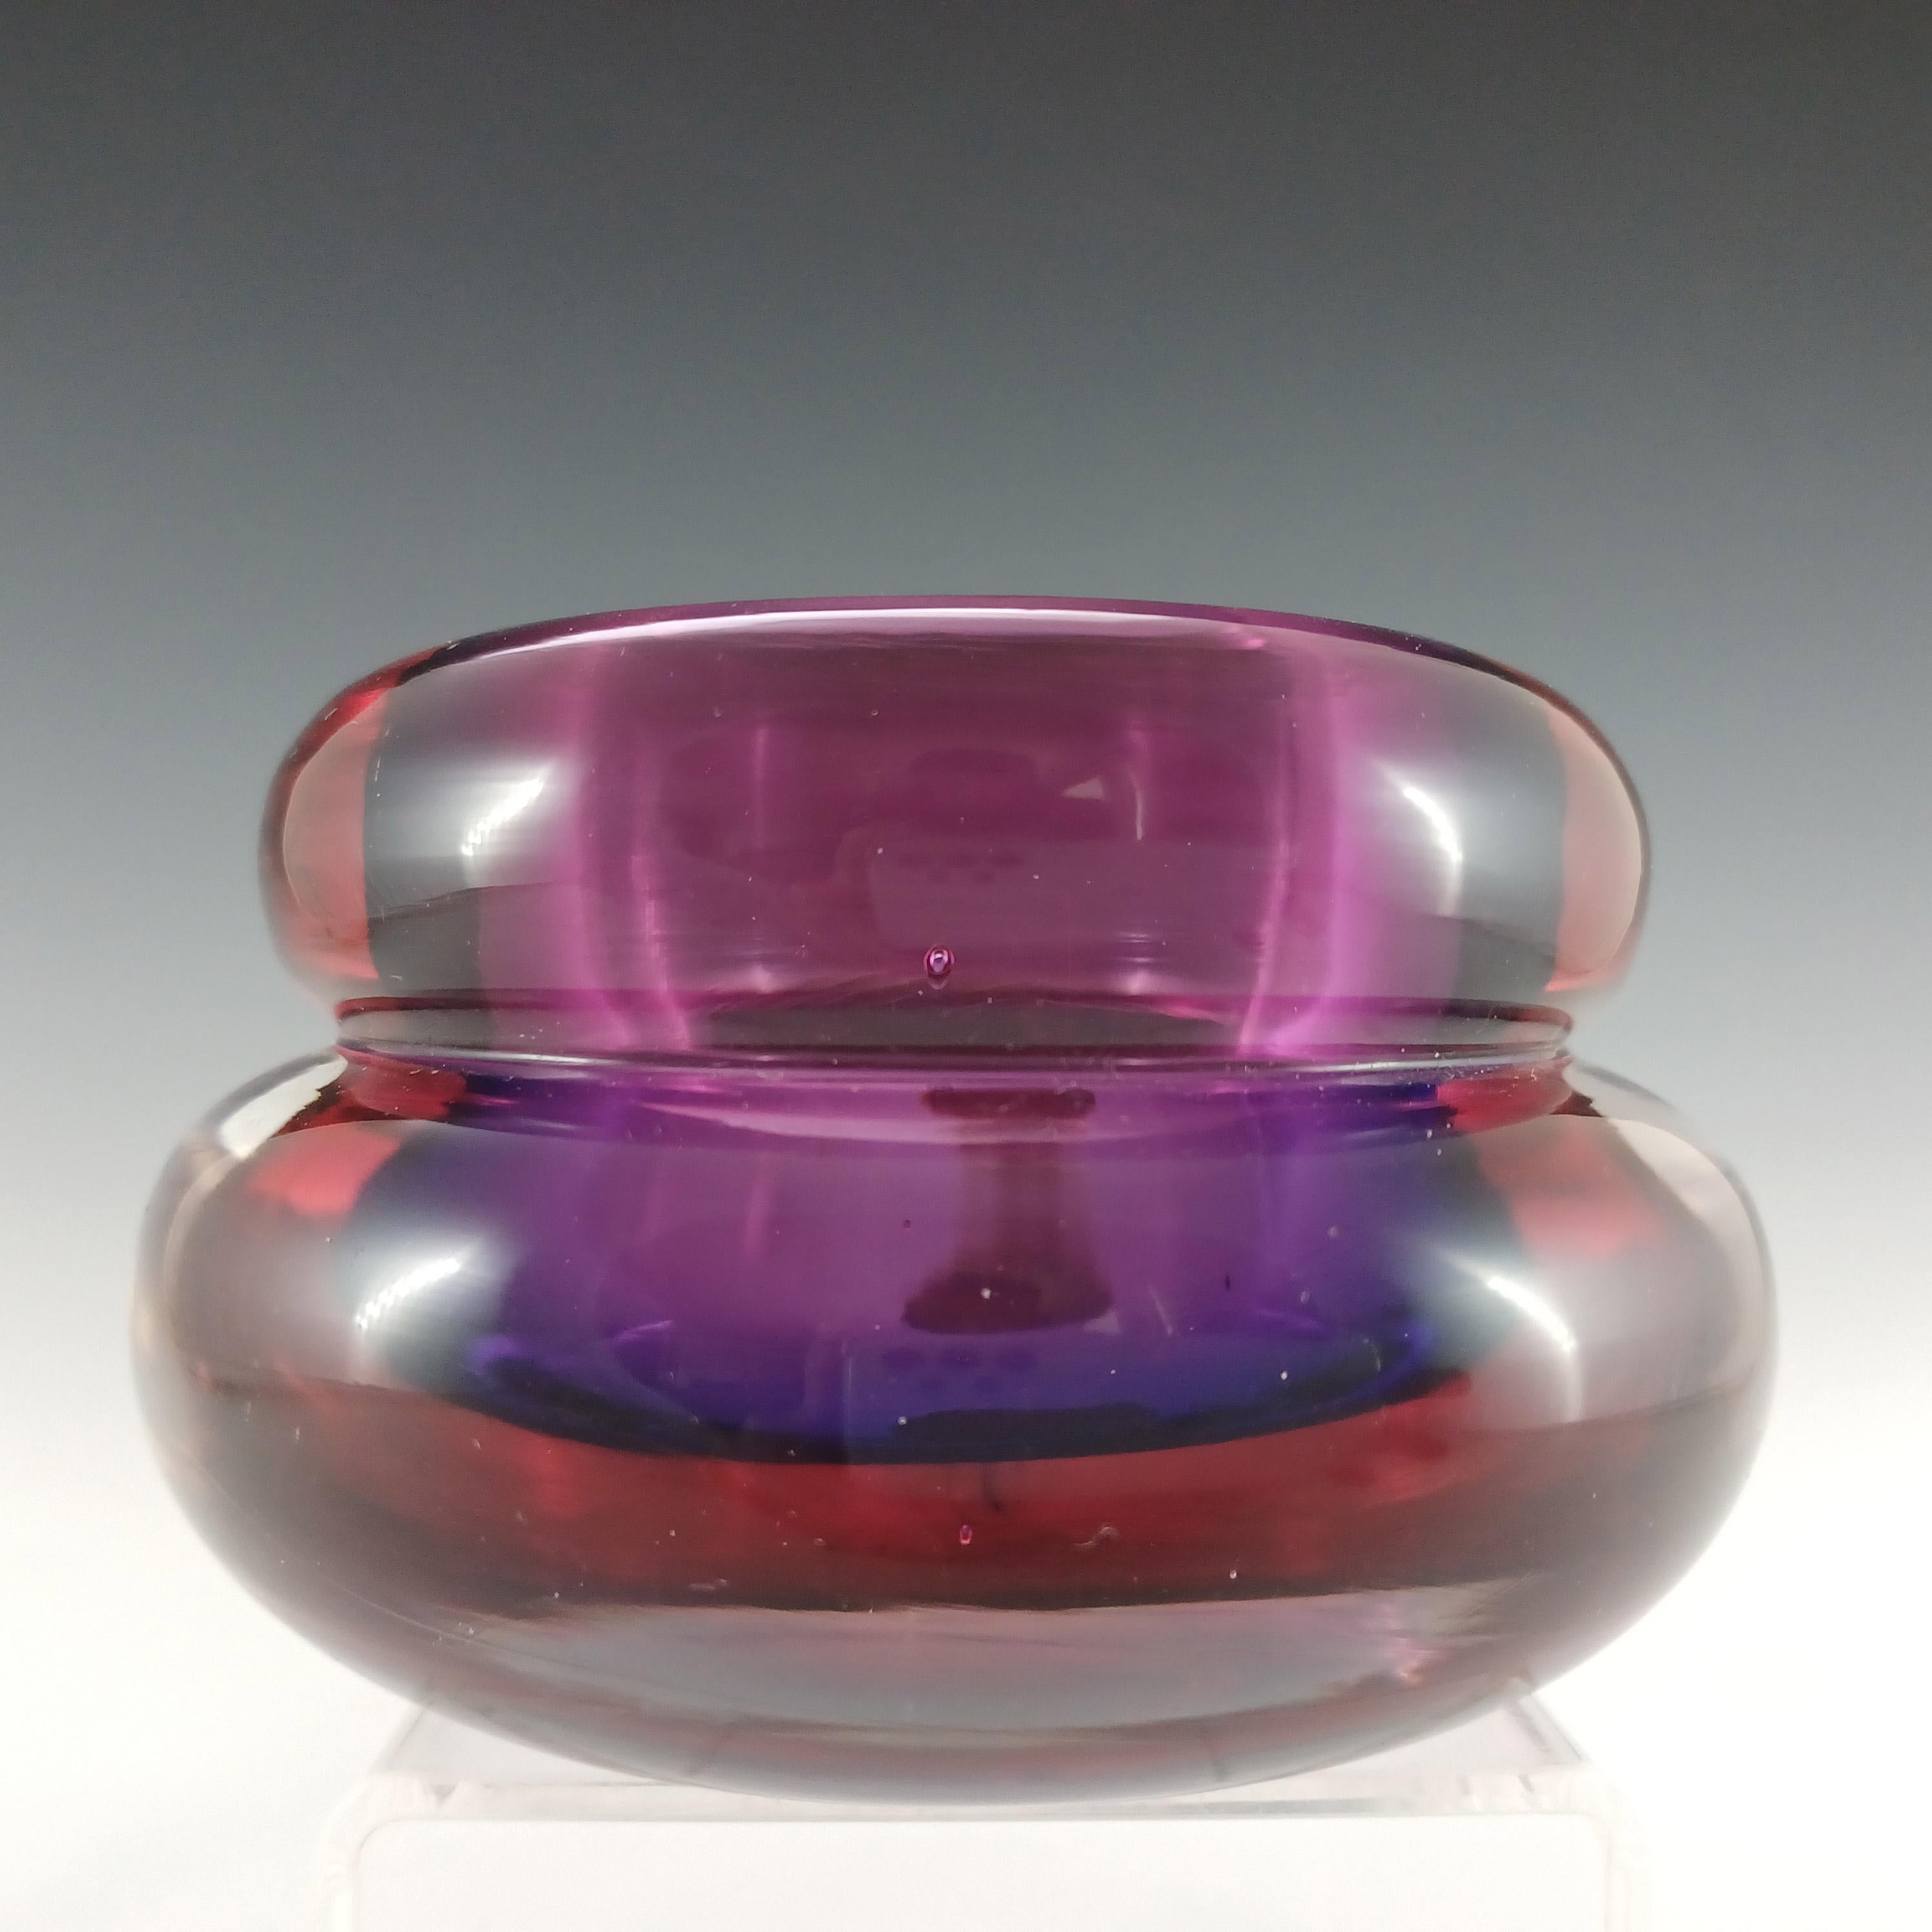 This is a magnificent 1950/60's Venetian glass candlestick holder, made on the island of Murano, near Venice, Italy. In a stunning combination of purple glass cased in pink glass, which is further encased in clear glass, using the sommerso